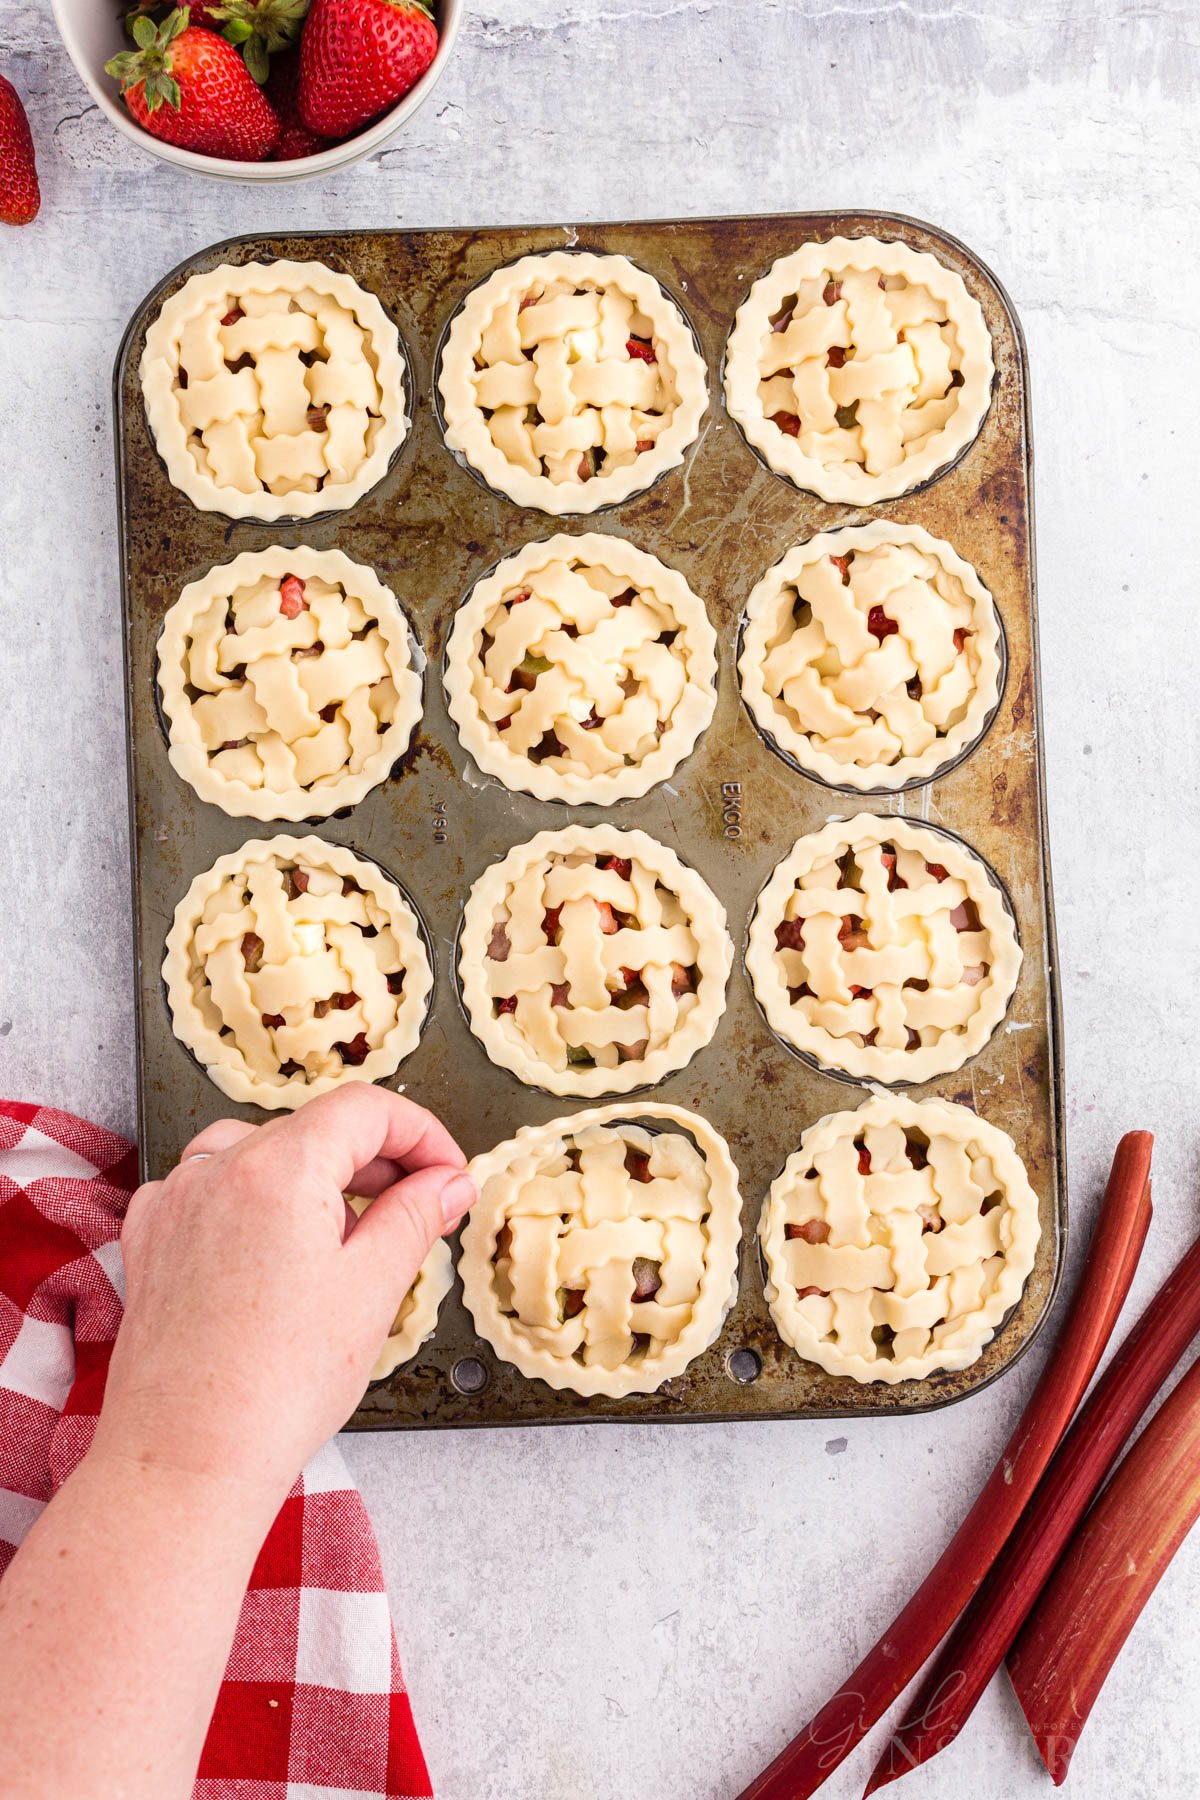 Lattice added to the edge of the Strawberry Rhubarb Mini Pies in muffin tins.